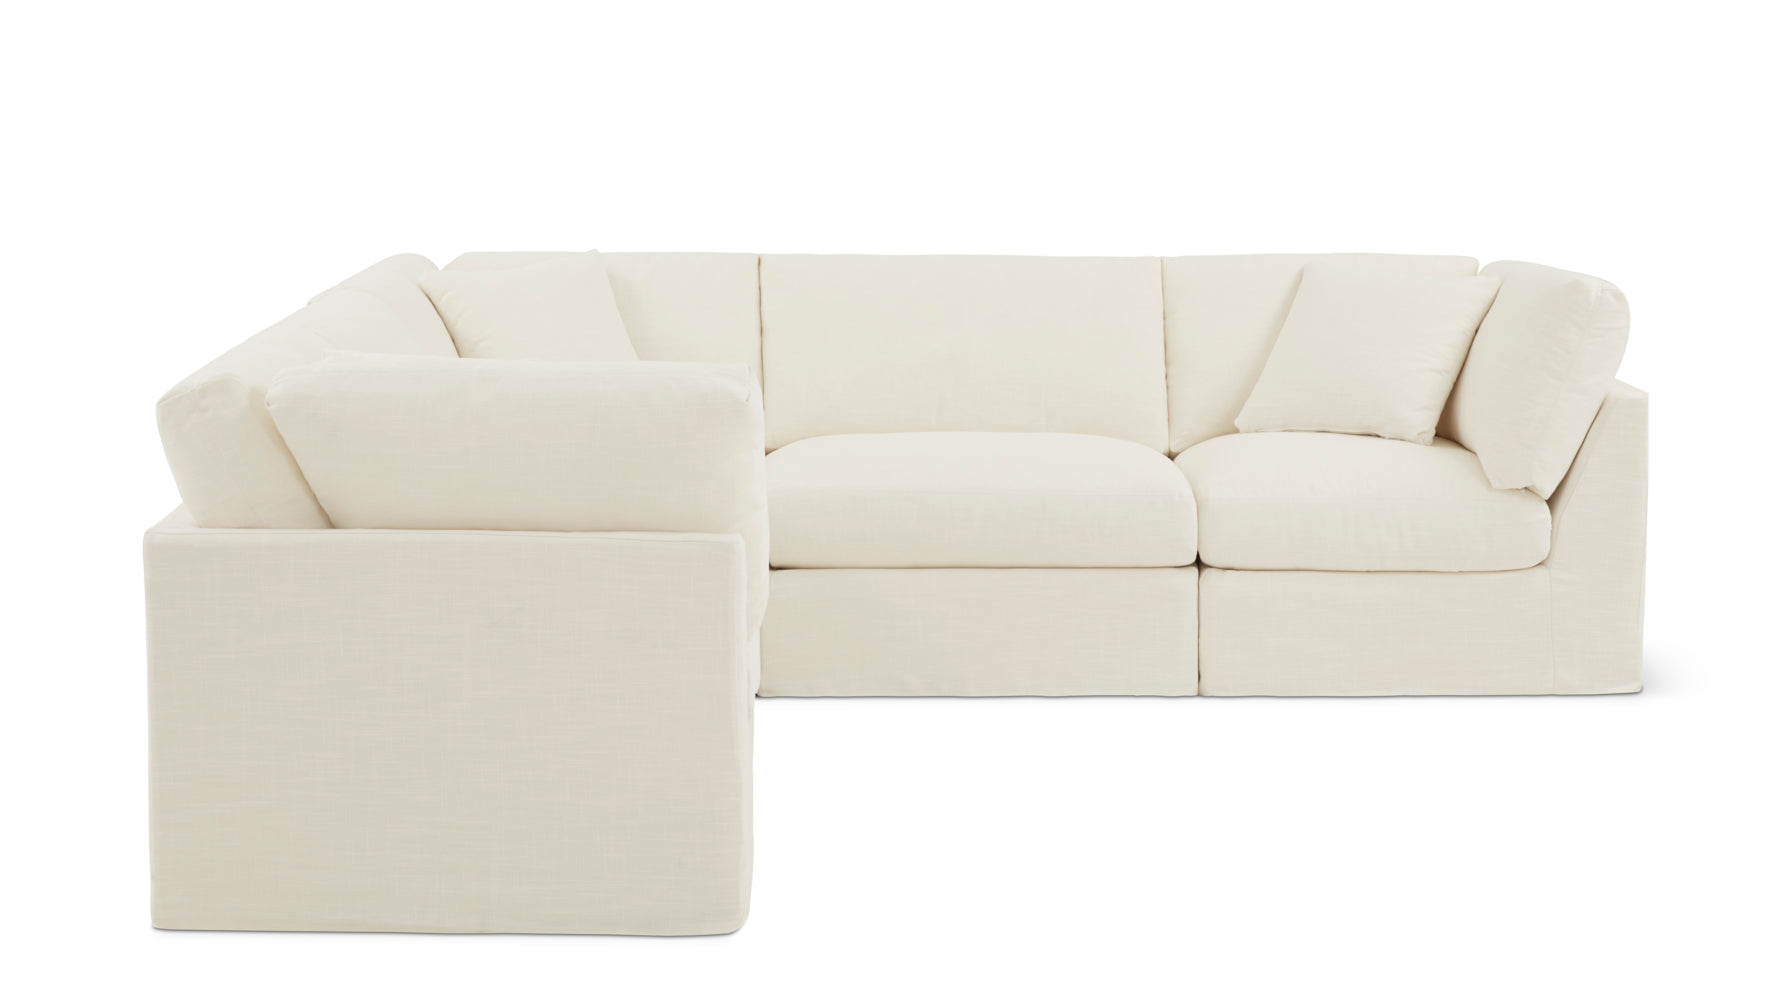 Get Together™ 5-Piece Modular Sectional Closed, Standard, Cream Linen - Image 1